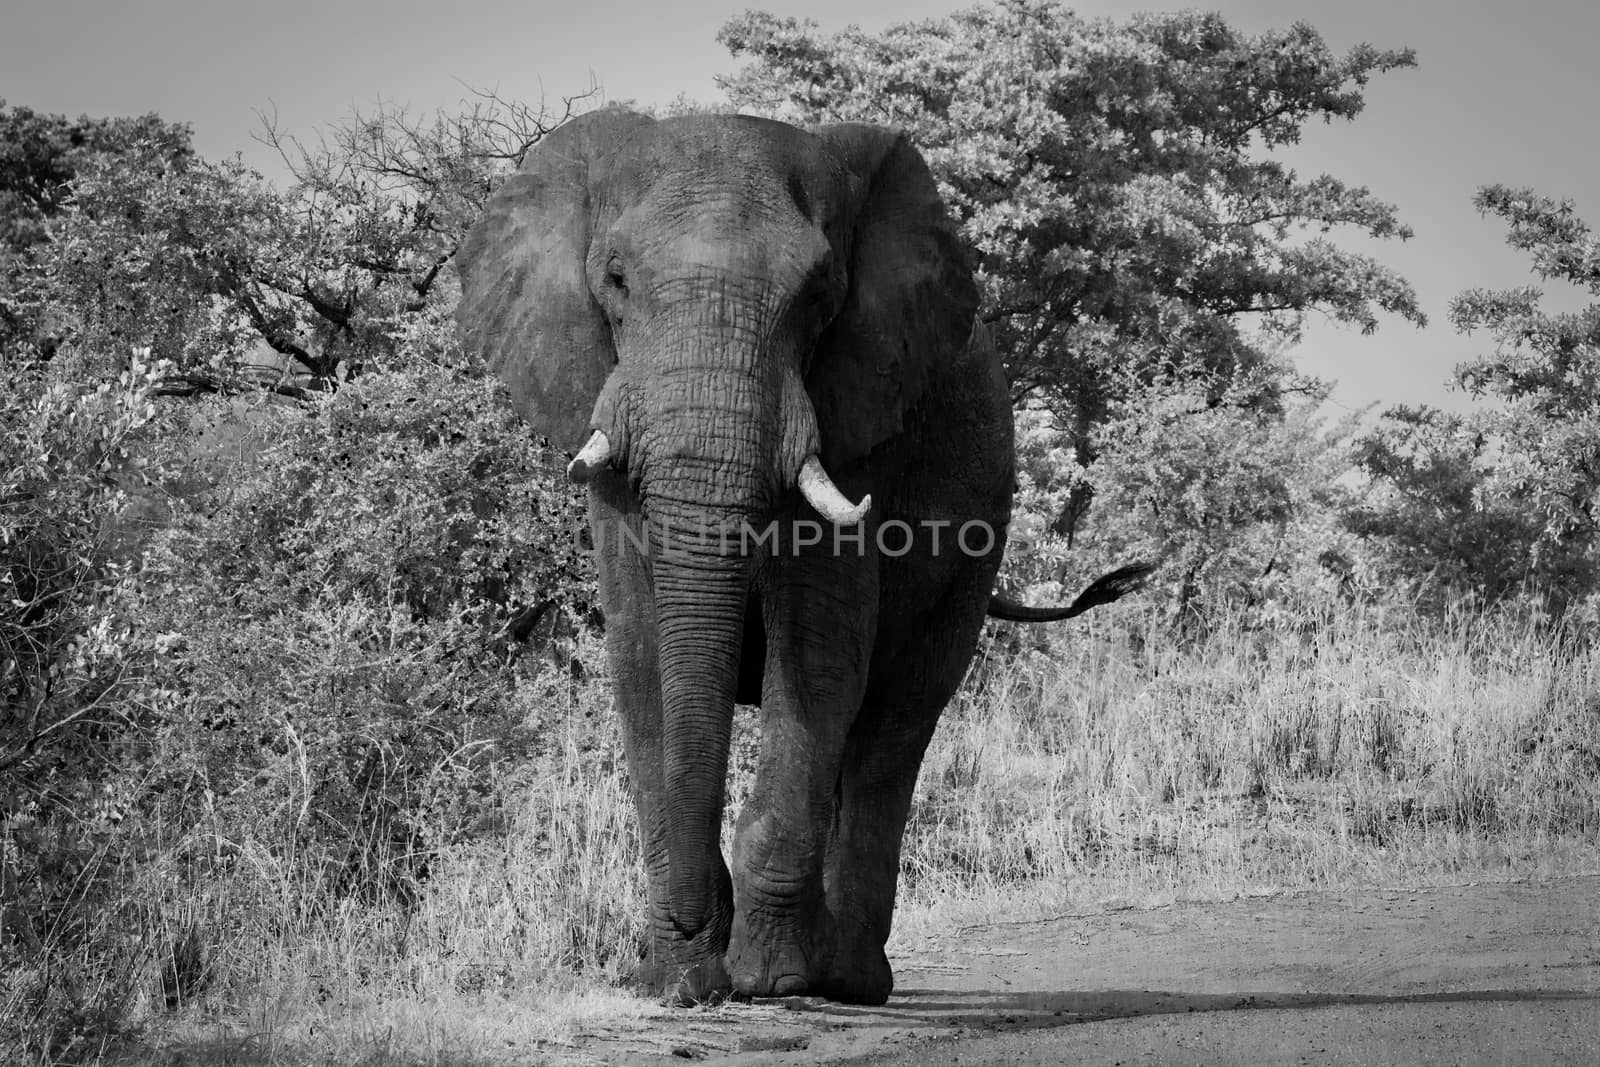 Elephant walking towards the camera in black and white in the Kruger National Park, South Africa. by Simoneemanphotography